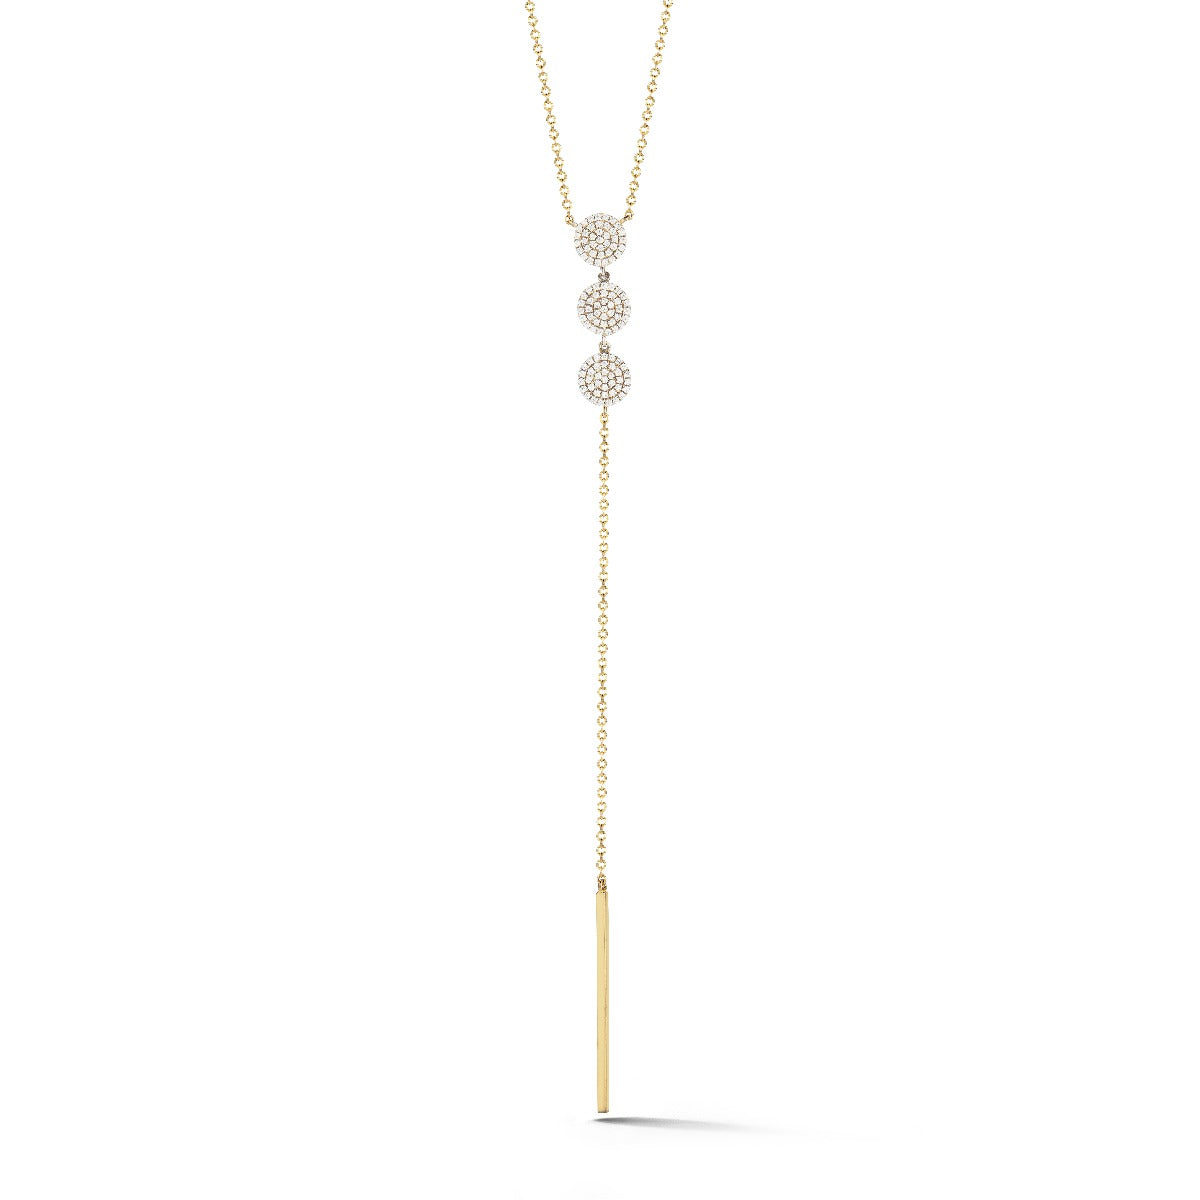 14K FASHIONABLE LARIAT NECKLACE WITH 114 DIAMONDS 0.38CT ON 18 INCHES CHAIN